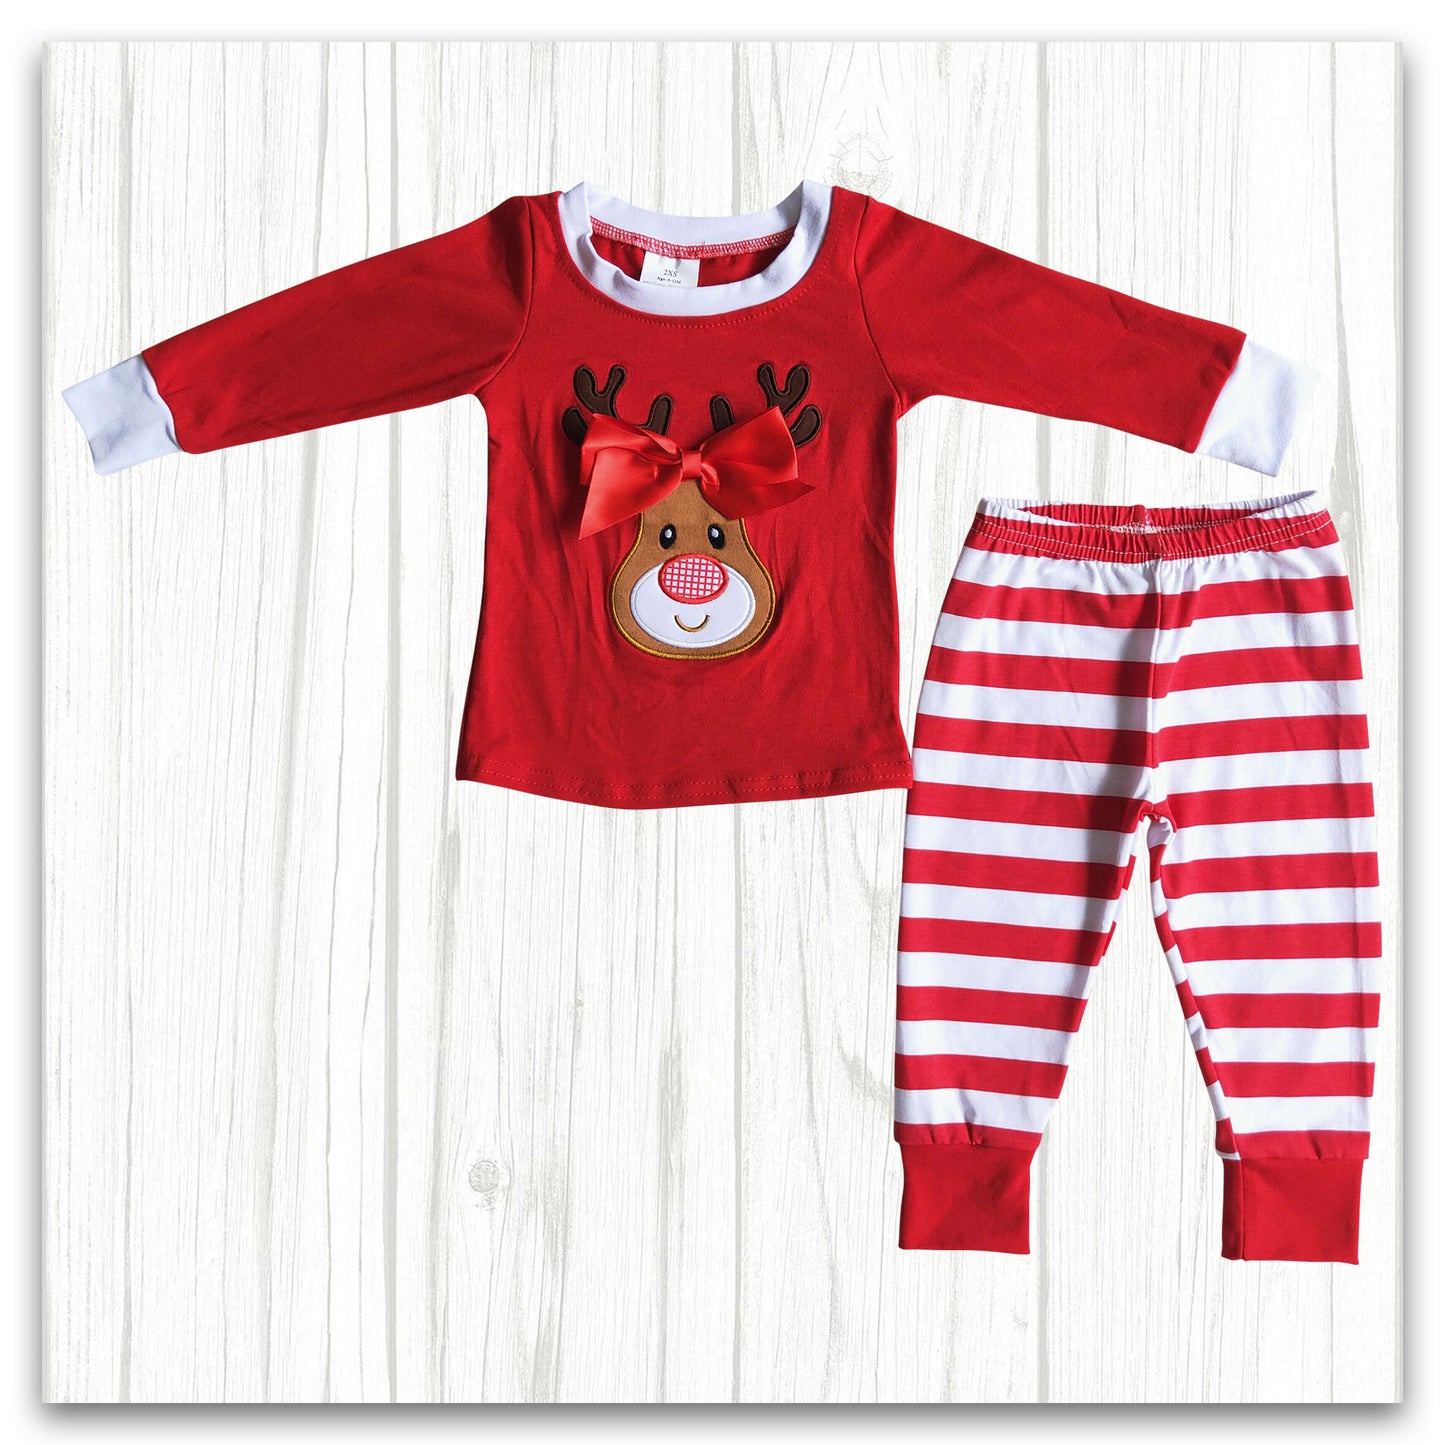 Cotton Red Deer Embroidery Pajamas